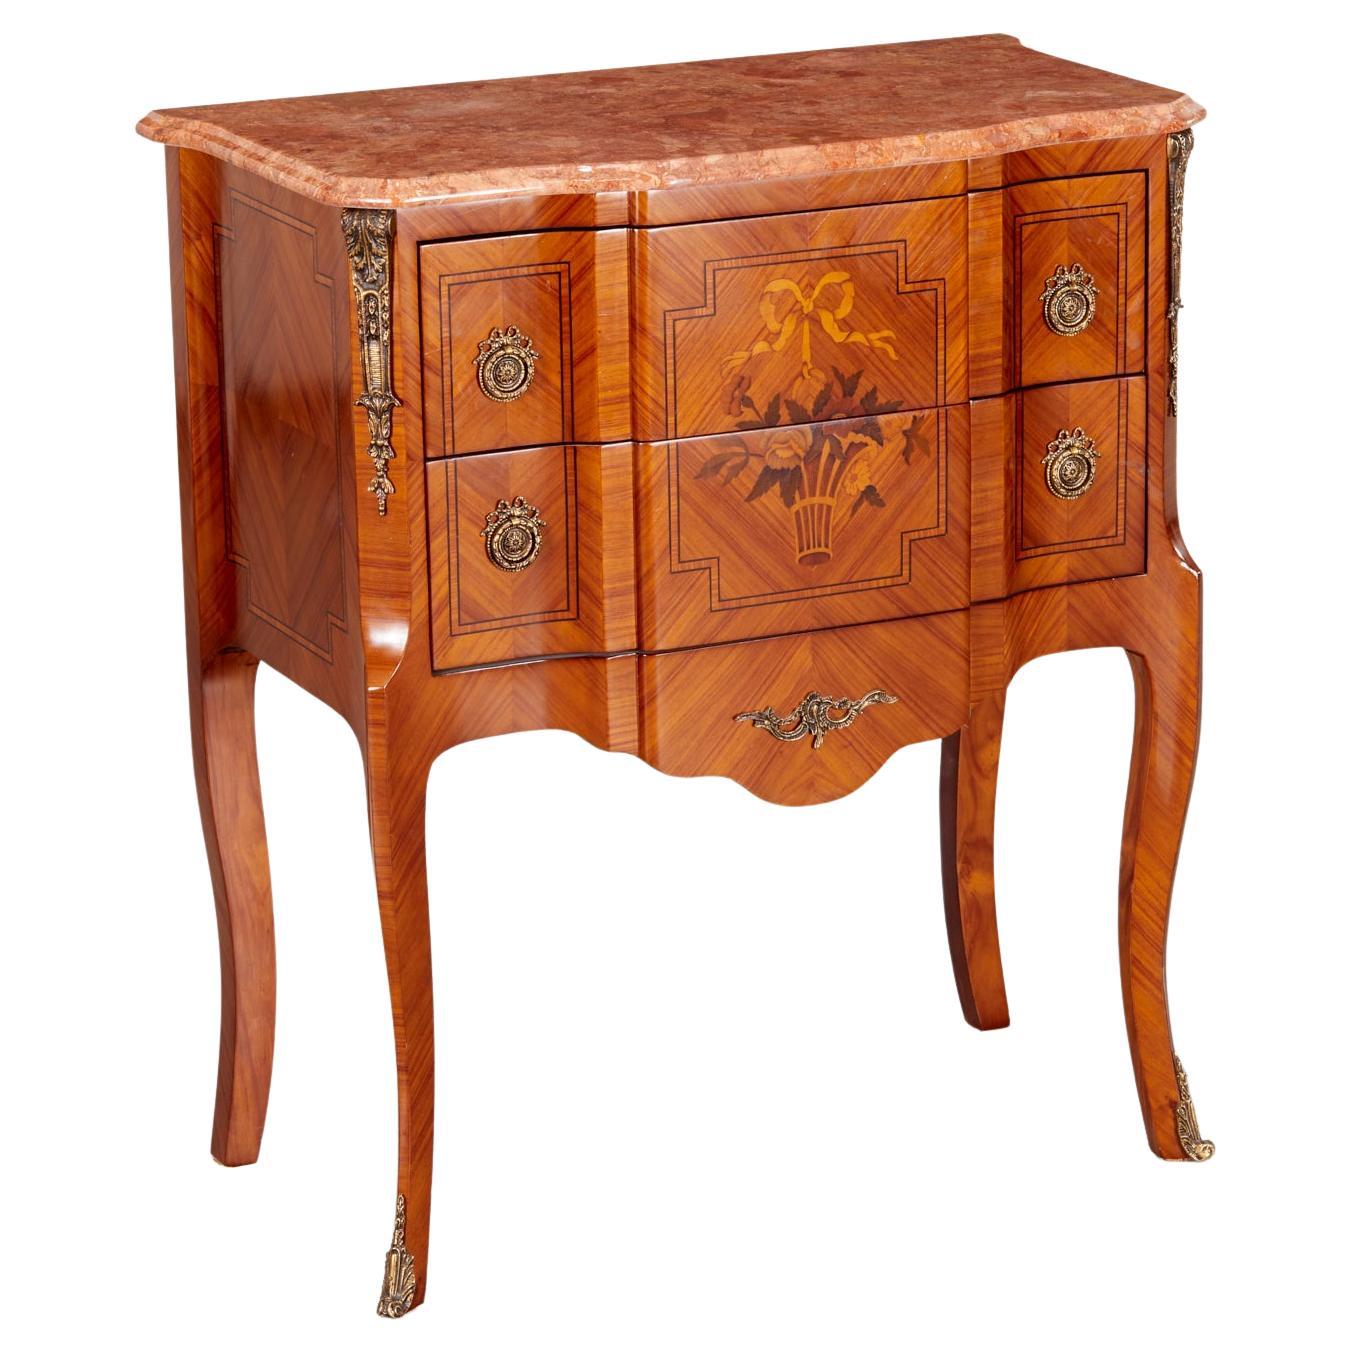 Vintage Louis XV/XVI Transitional Style Inlaid Commode with Brass Fittings